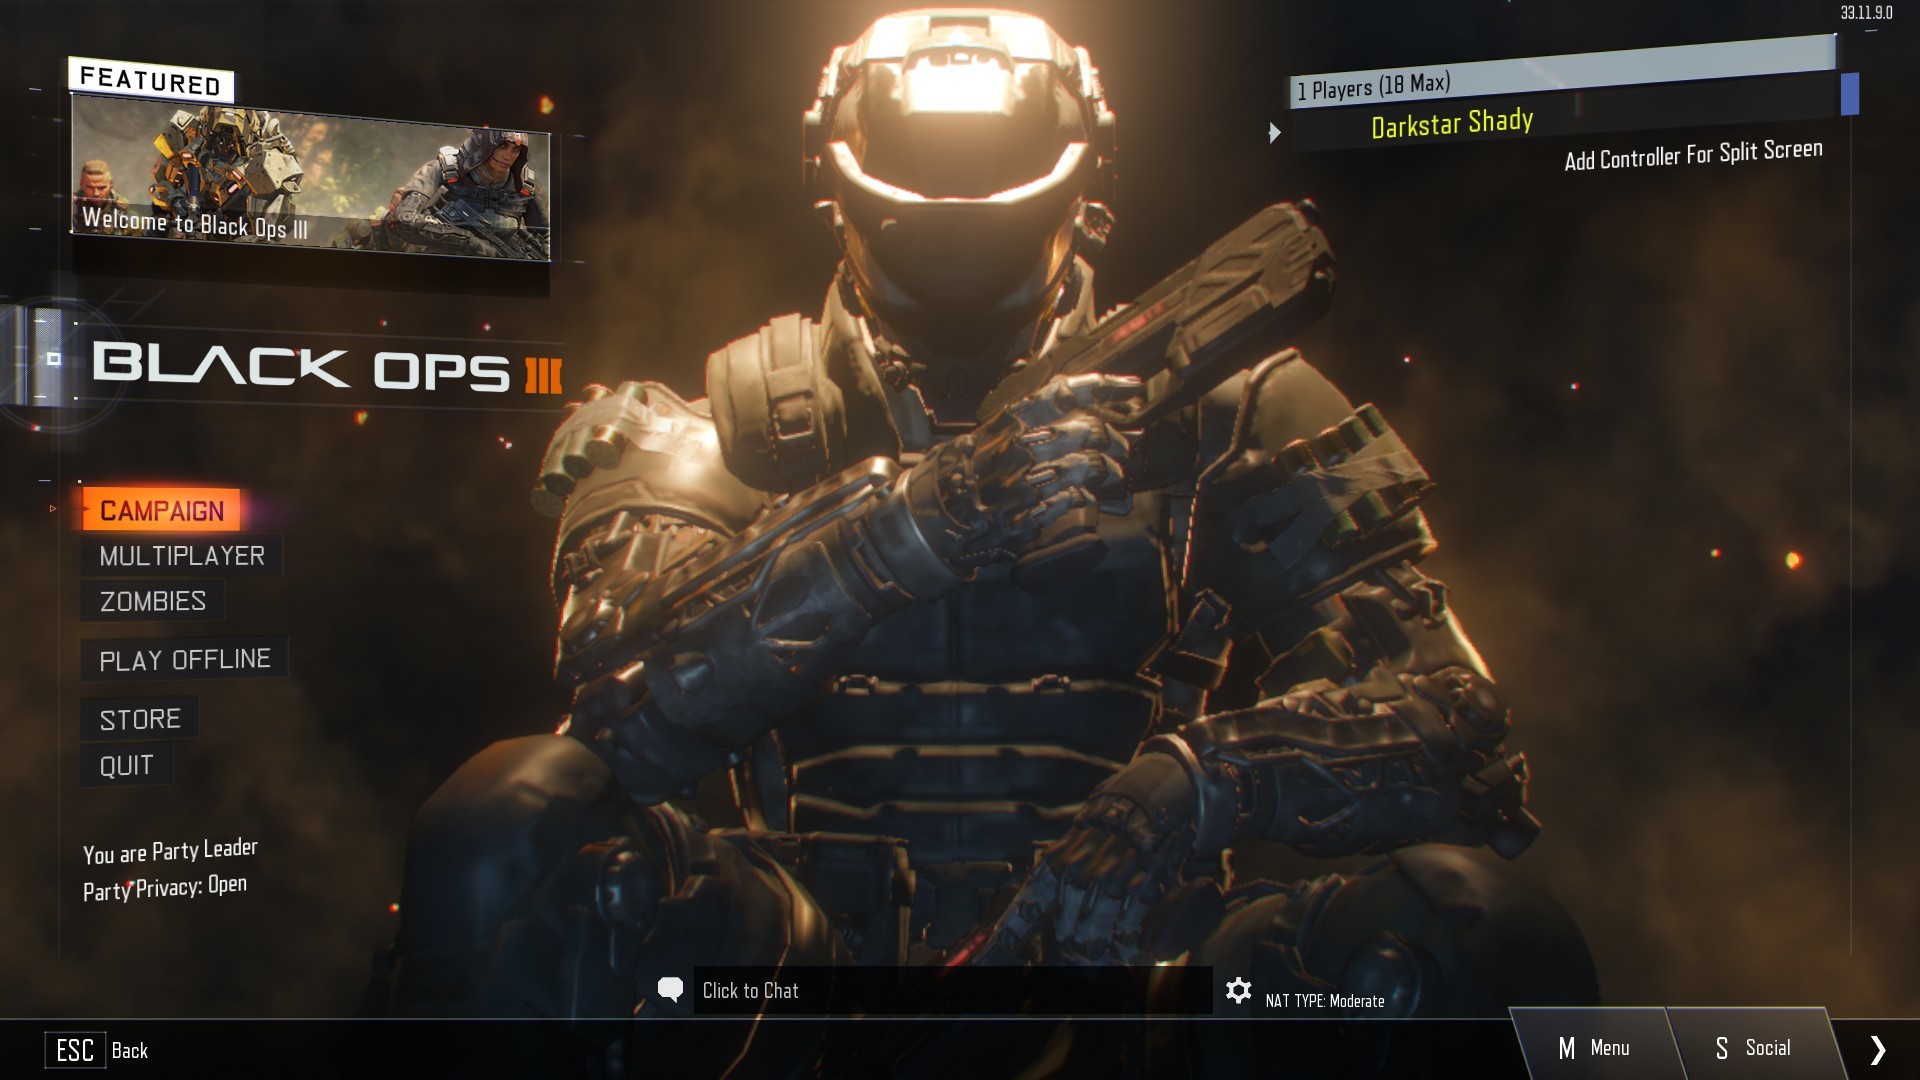 The main menu of Call of Duty Black Ops III running on PC